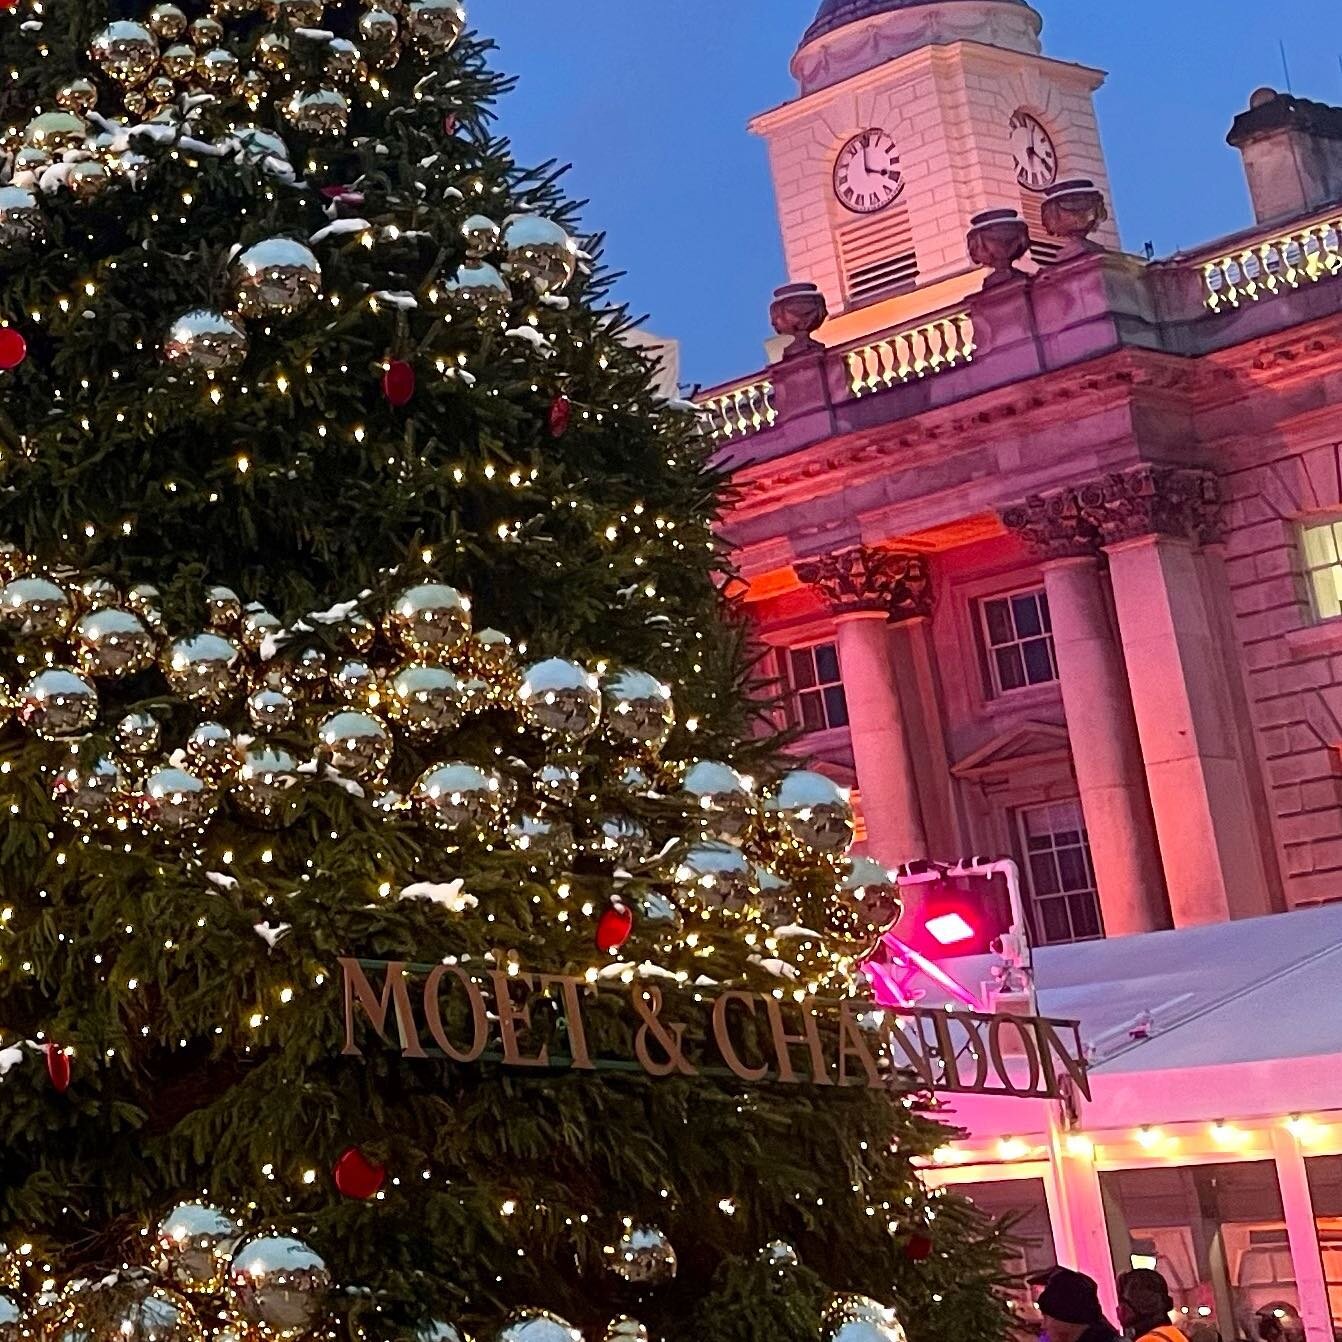 Thank you Somerset House for a magical Christmas party. Ice skating, mulled wine, hot chocolate, a beautiful location and great company - we even had snow - what more could you ask for?

#christmastree #christmas #christmasparty #iceskating #snow #lo